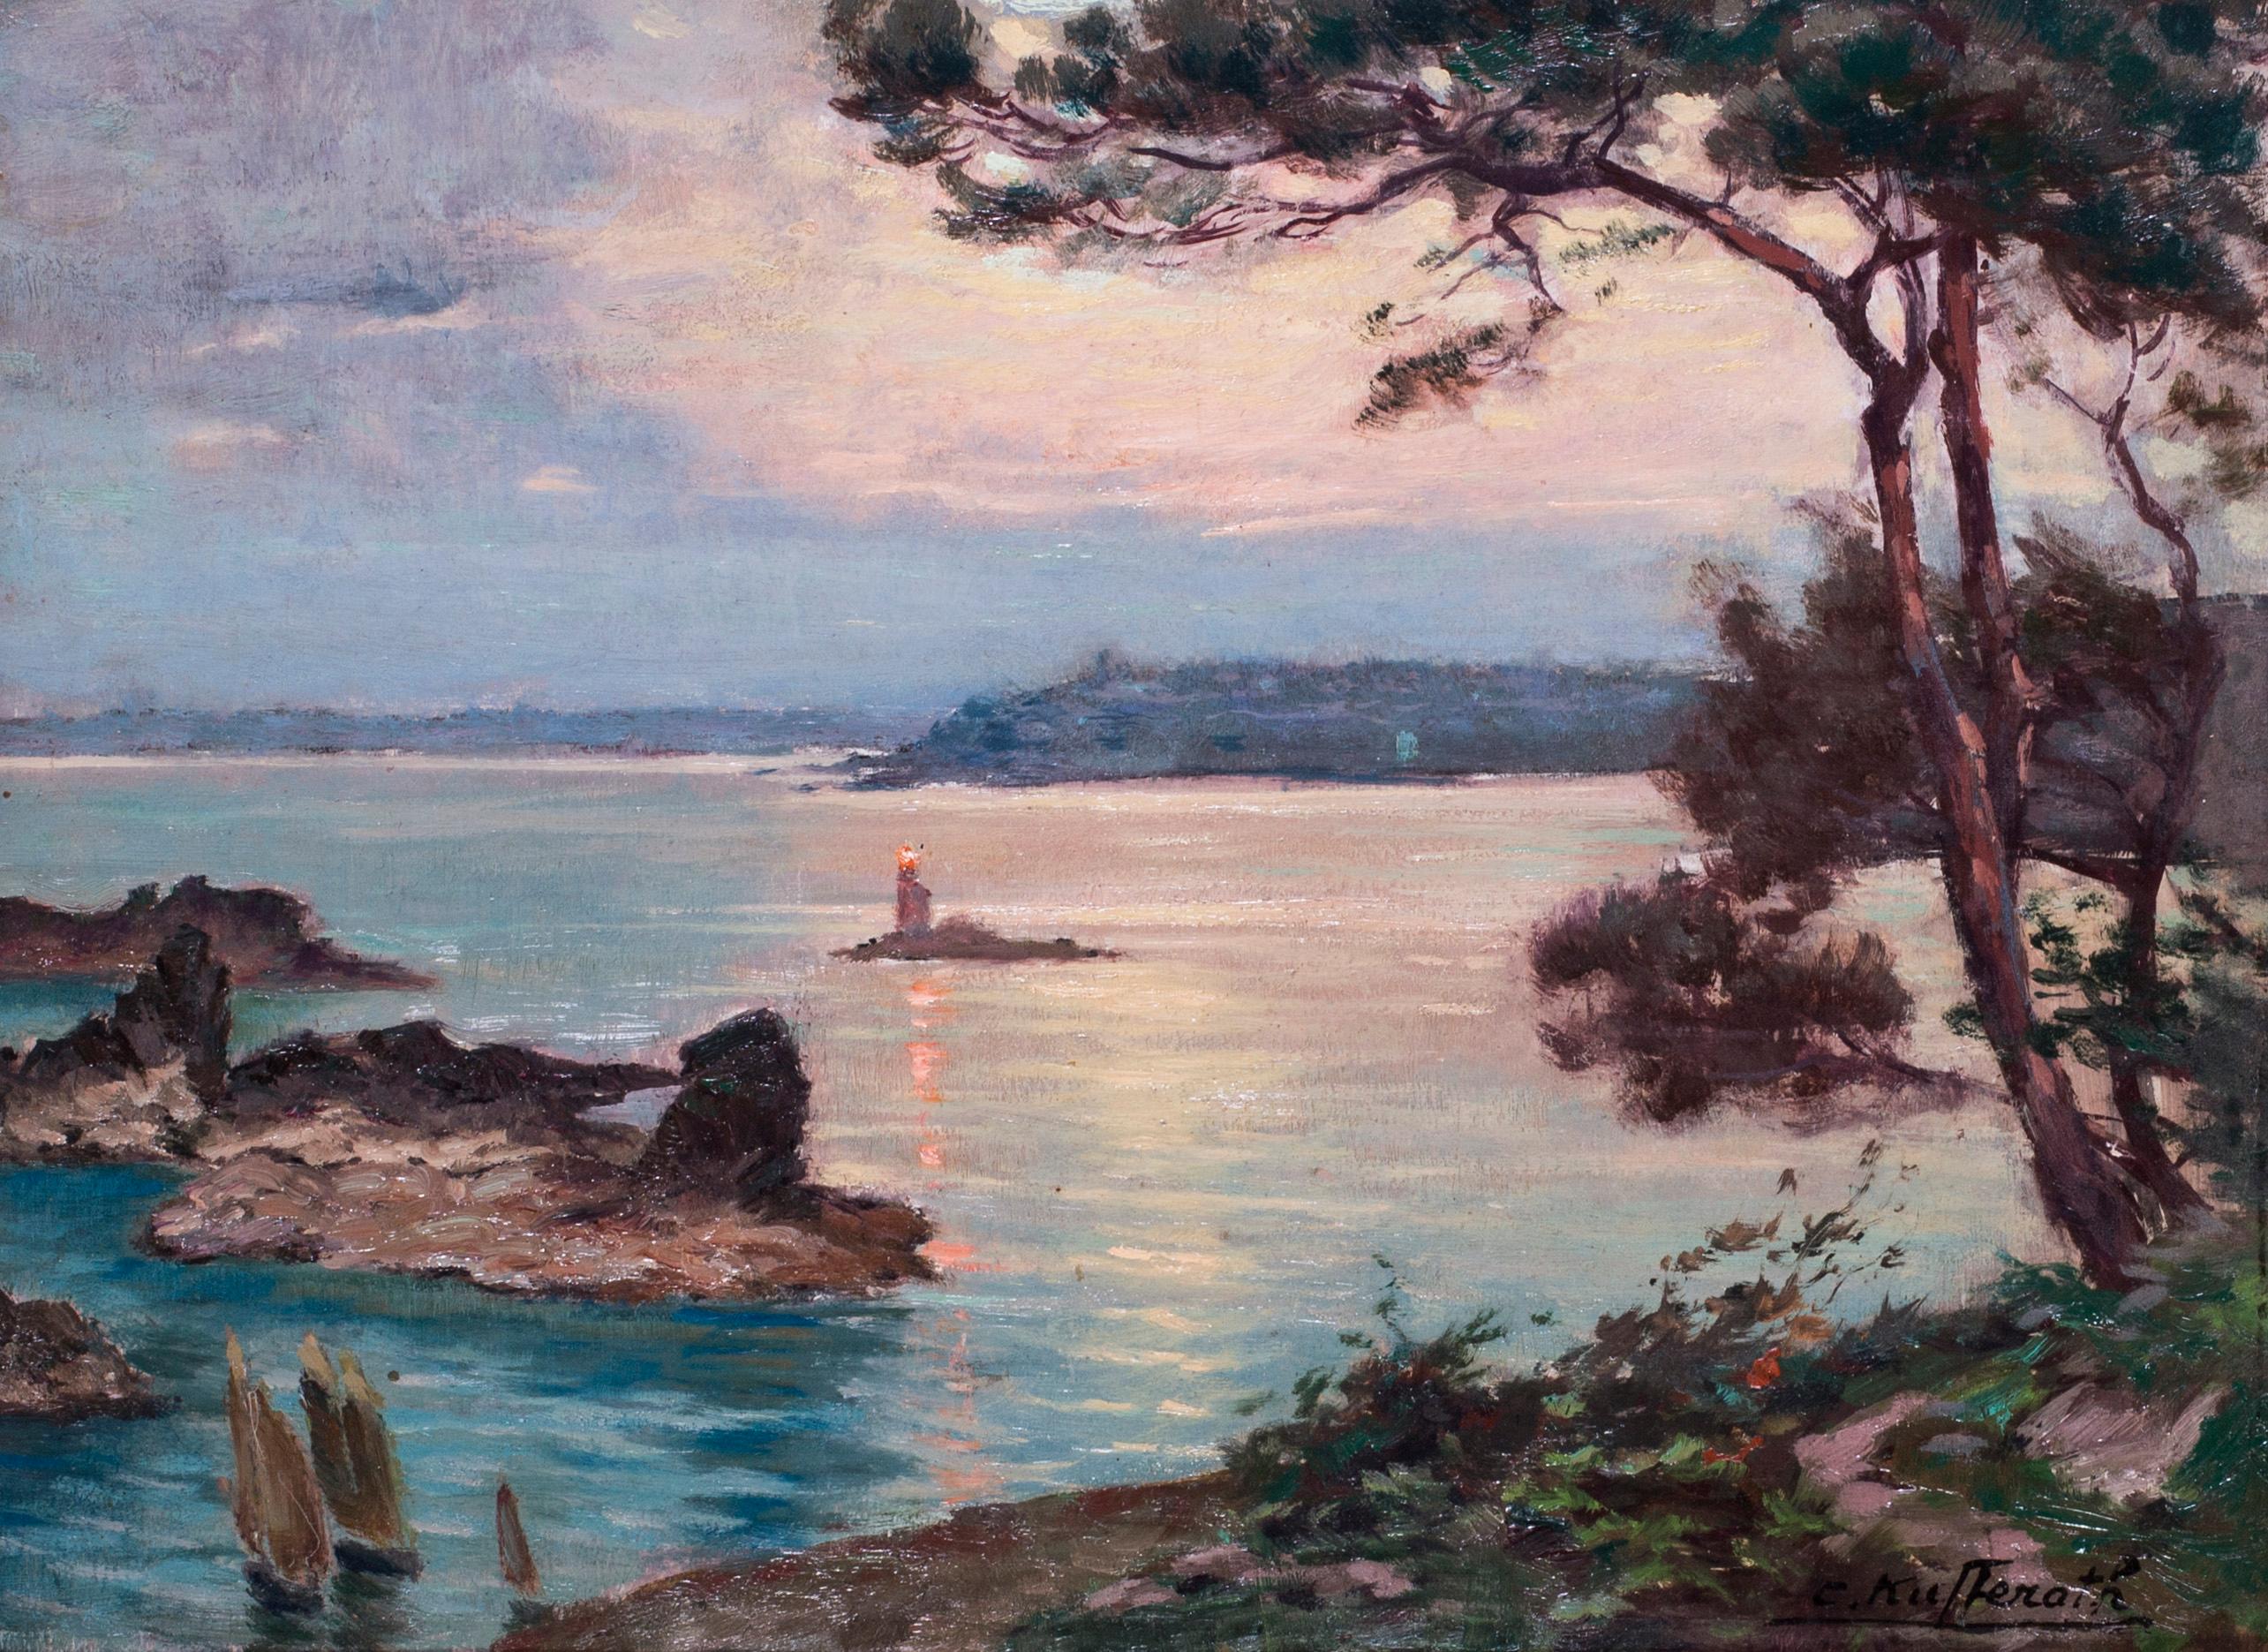 Moonlight over the bay, the South of France - Painting by Camille Kufferath